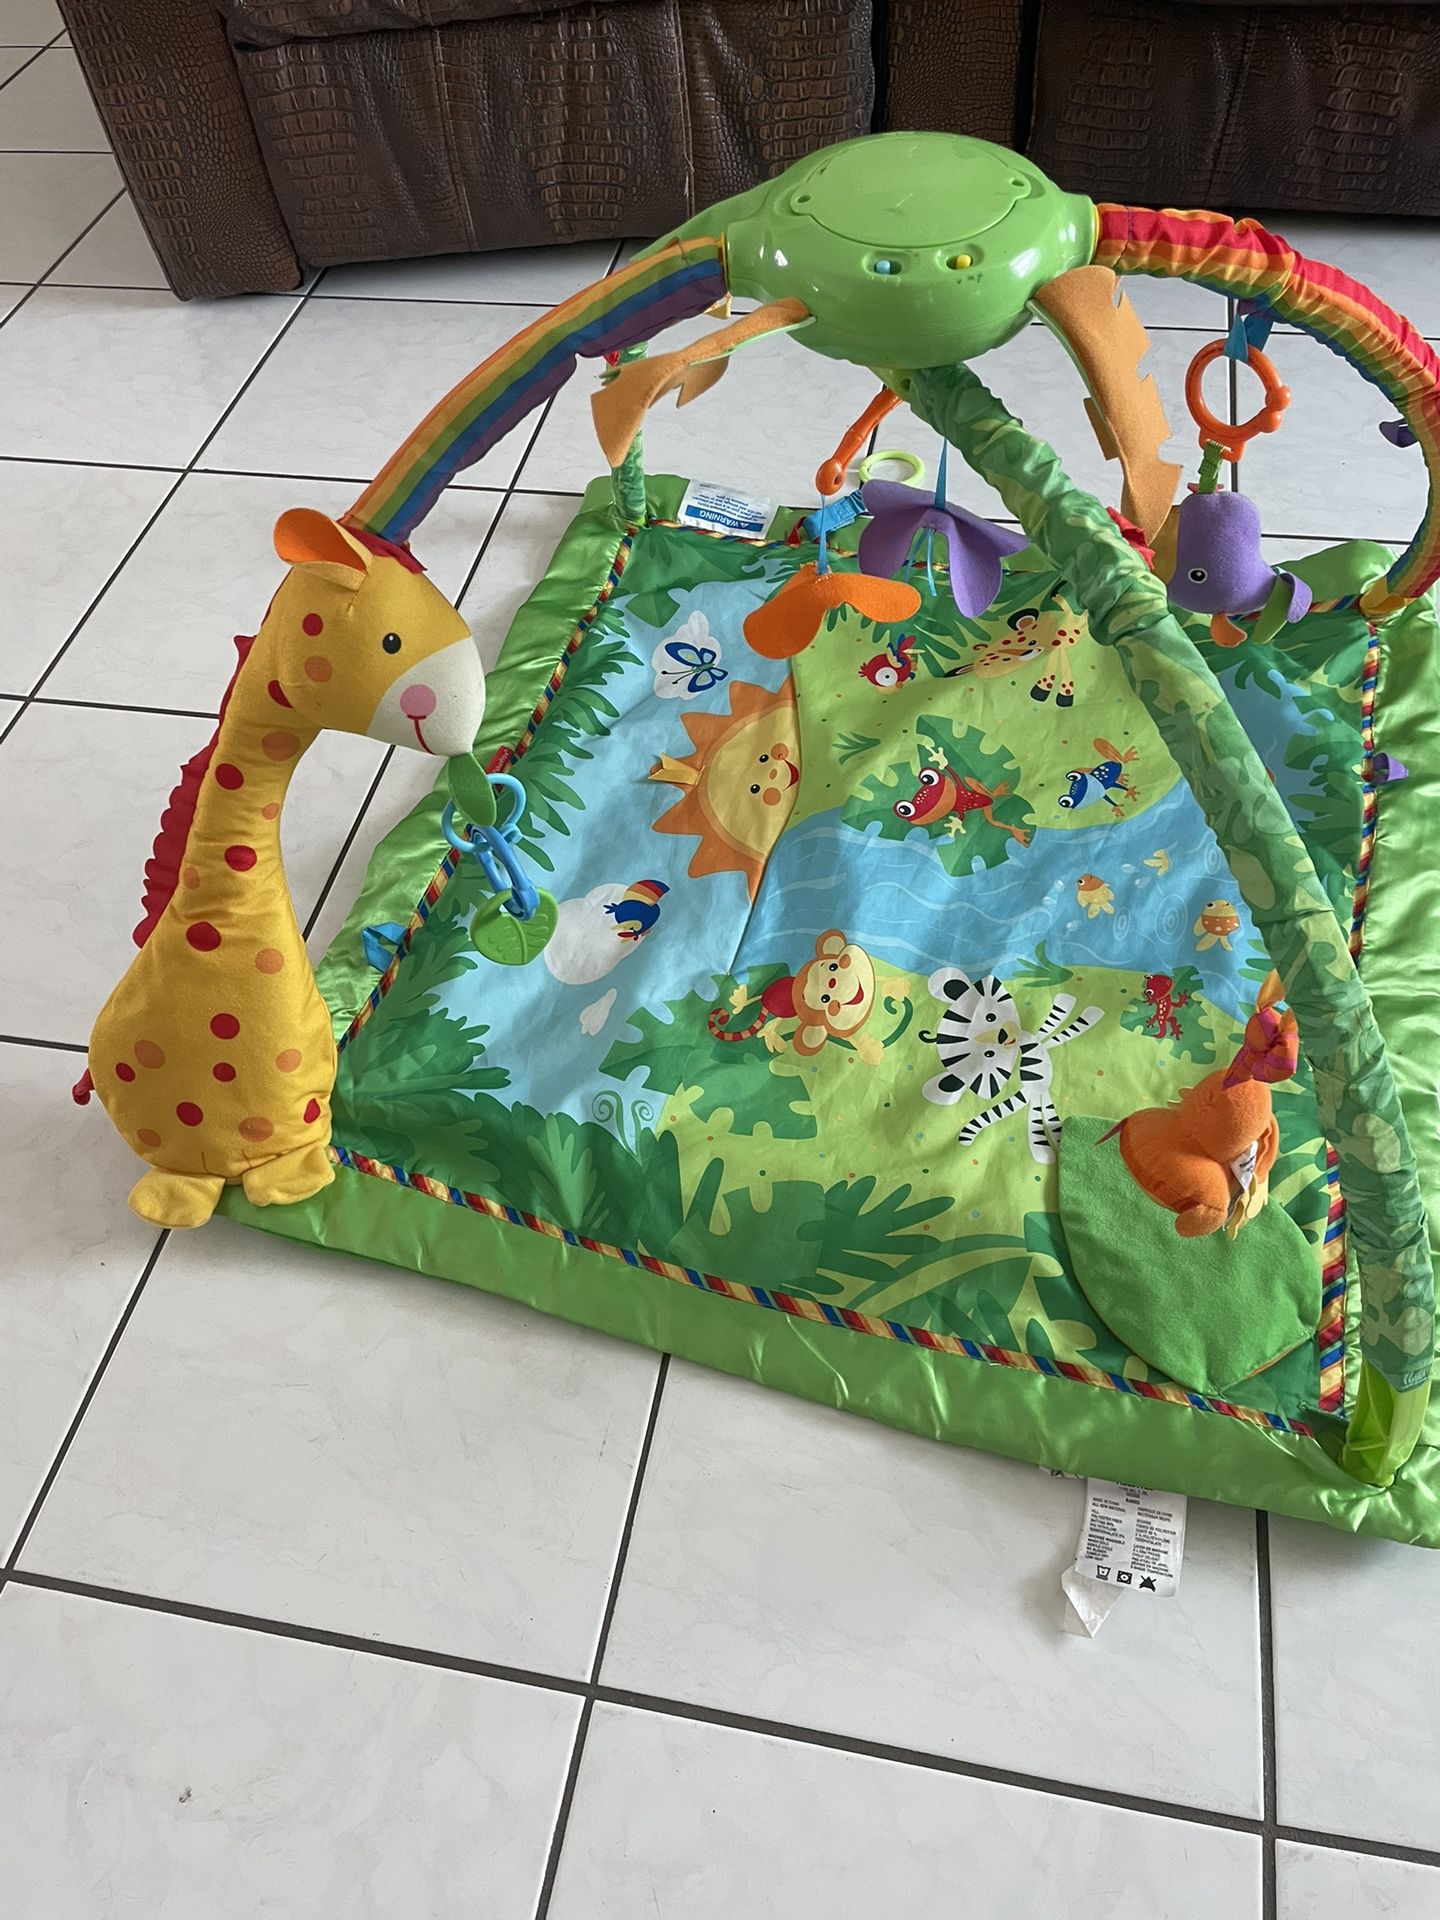 toy for the baby to play on the floor, very clean and beautiful with many toys and music and easy to store i